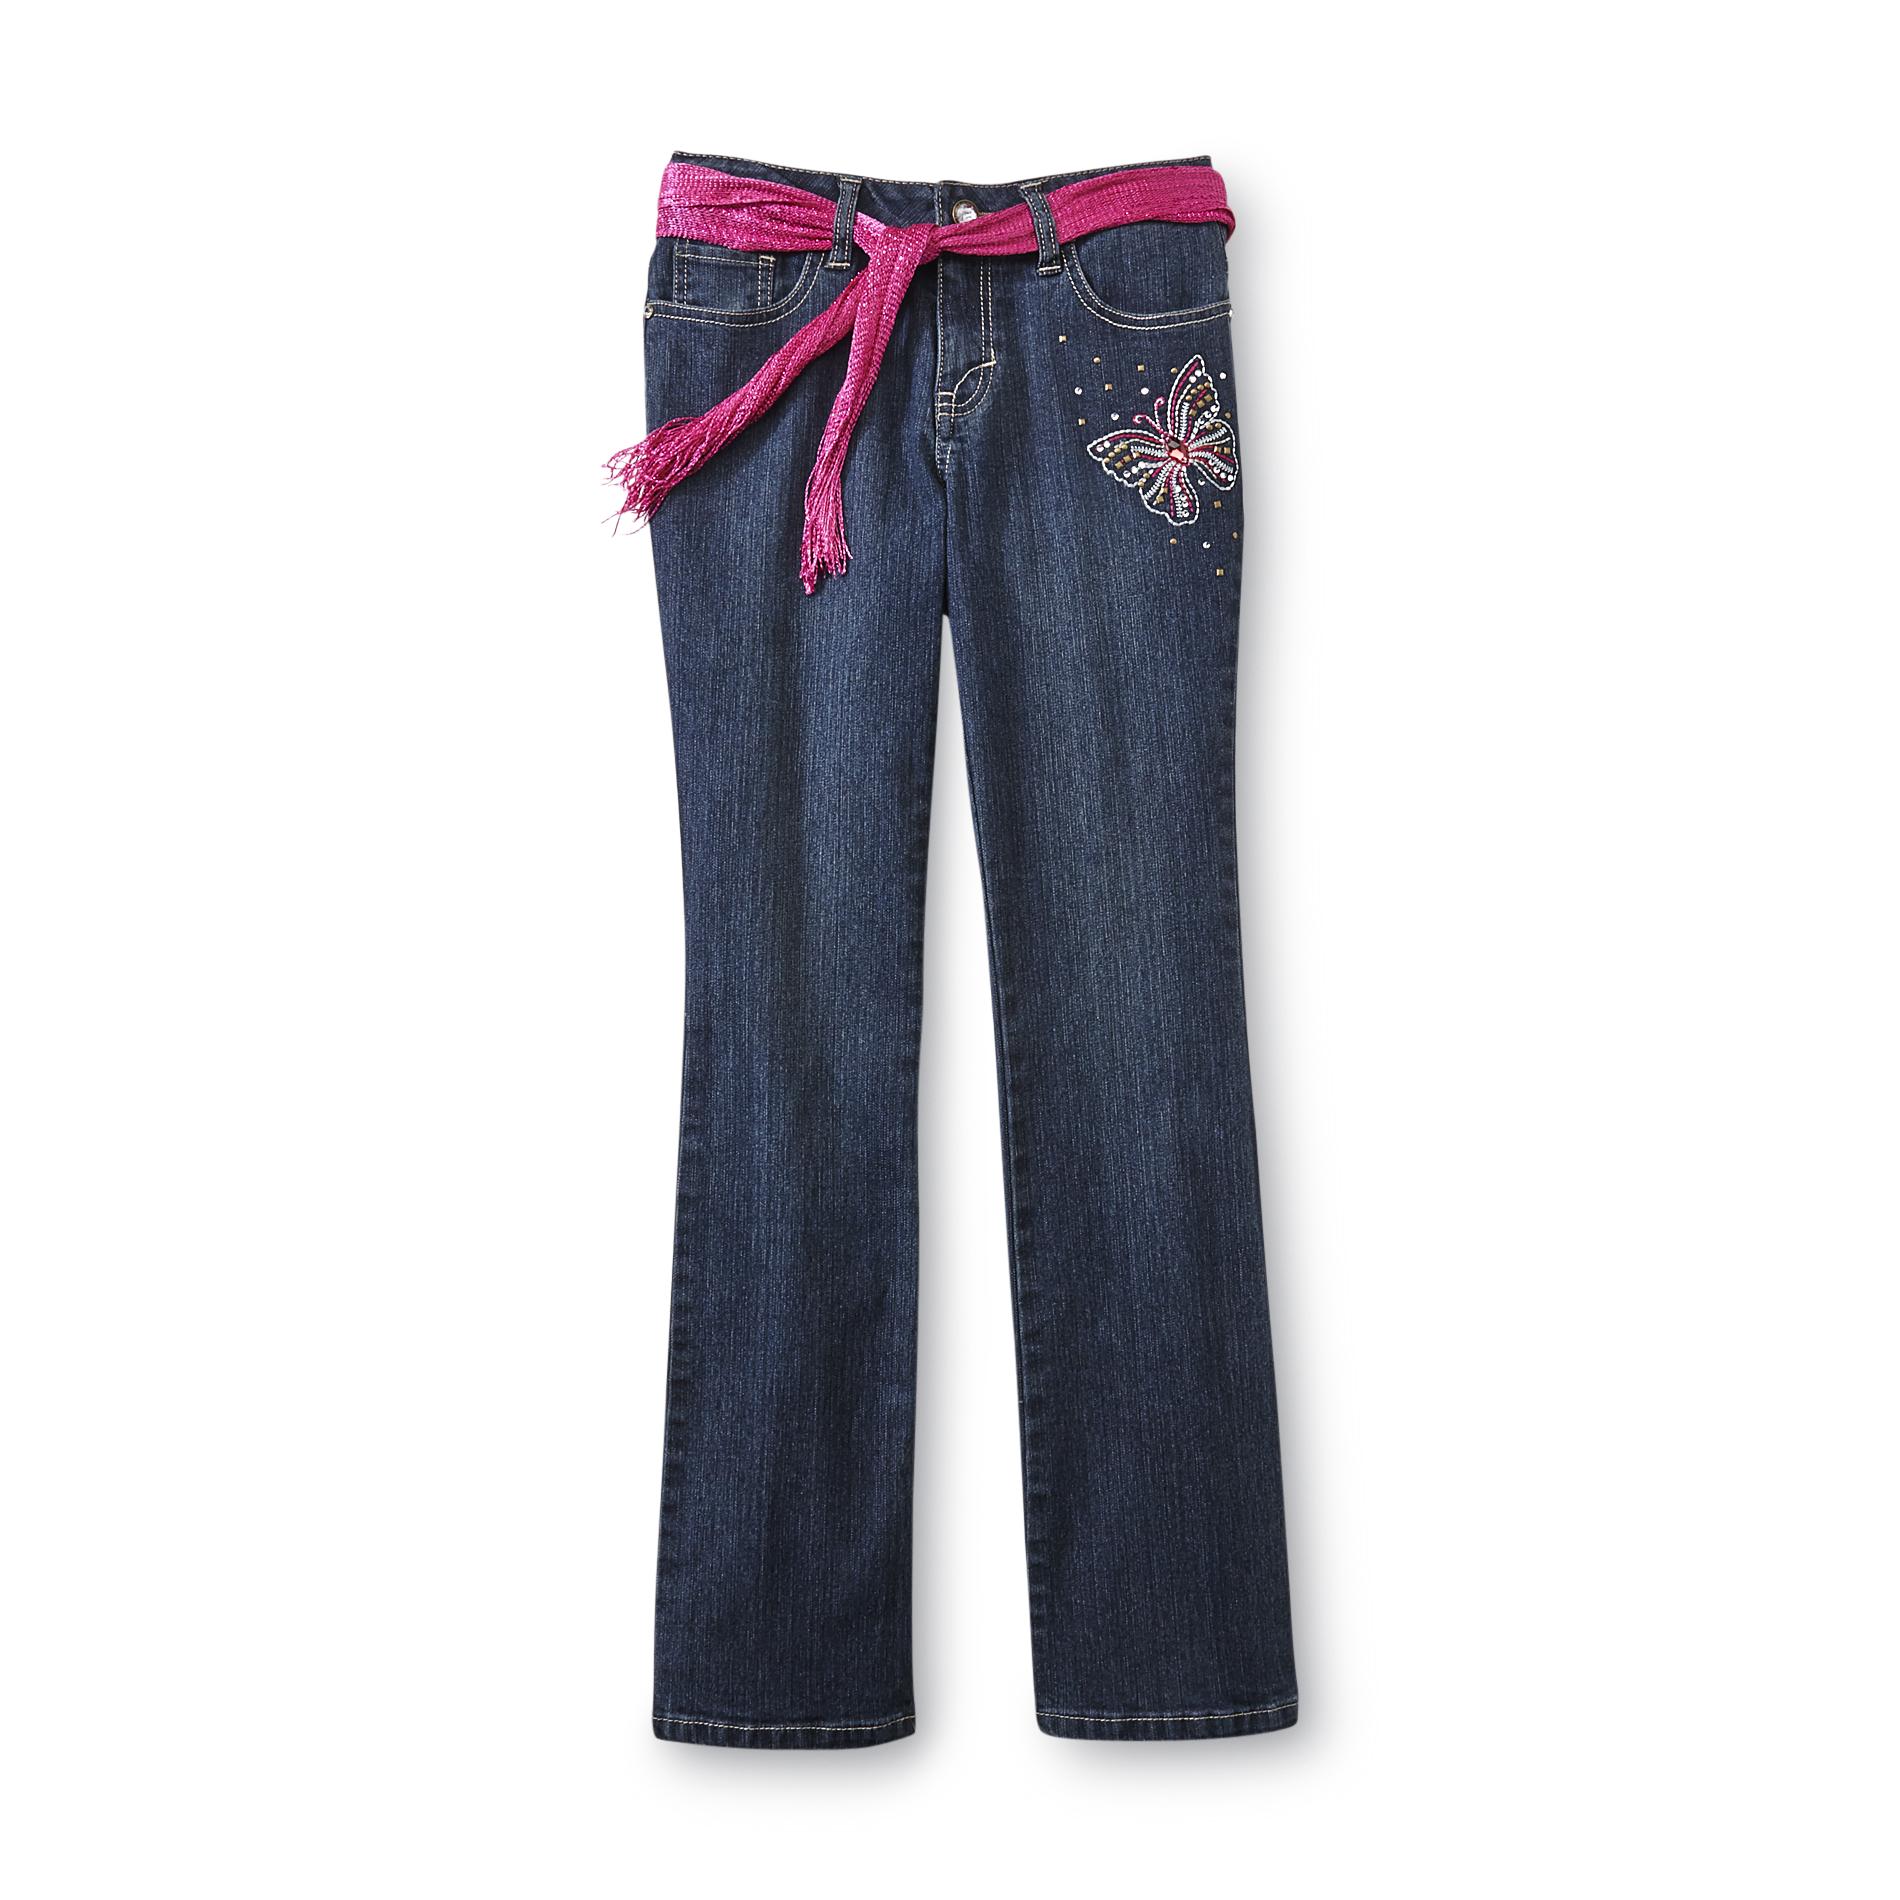 Route 66 Girl's Bootcut Skinny Jeans & Belt - Embroidered